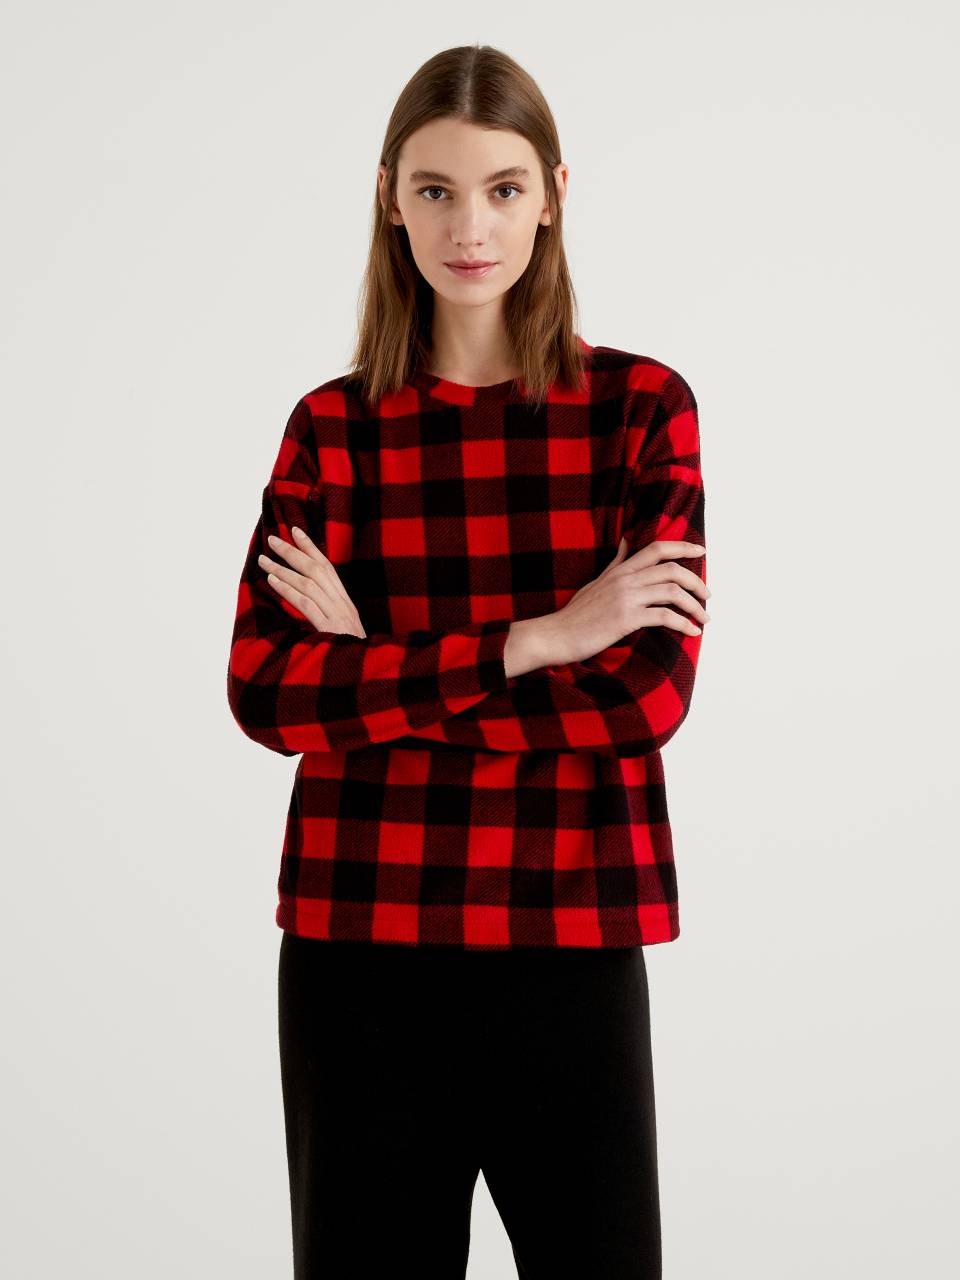 Benetton Sweater in check pattern. 1